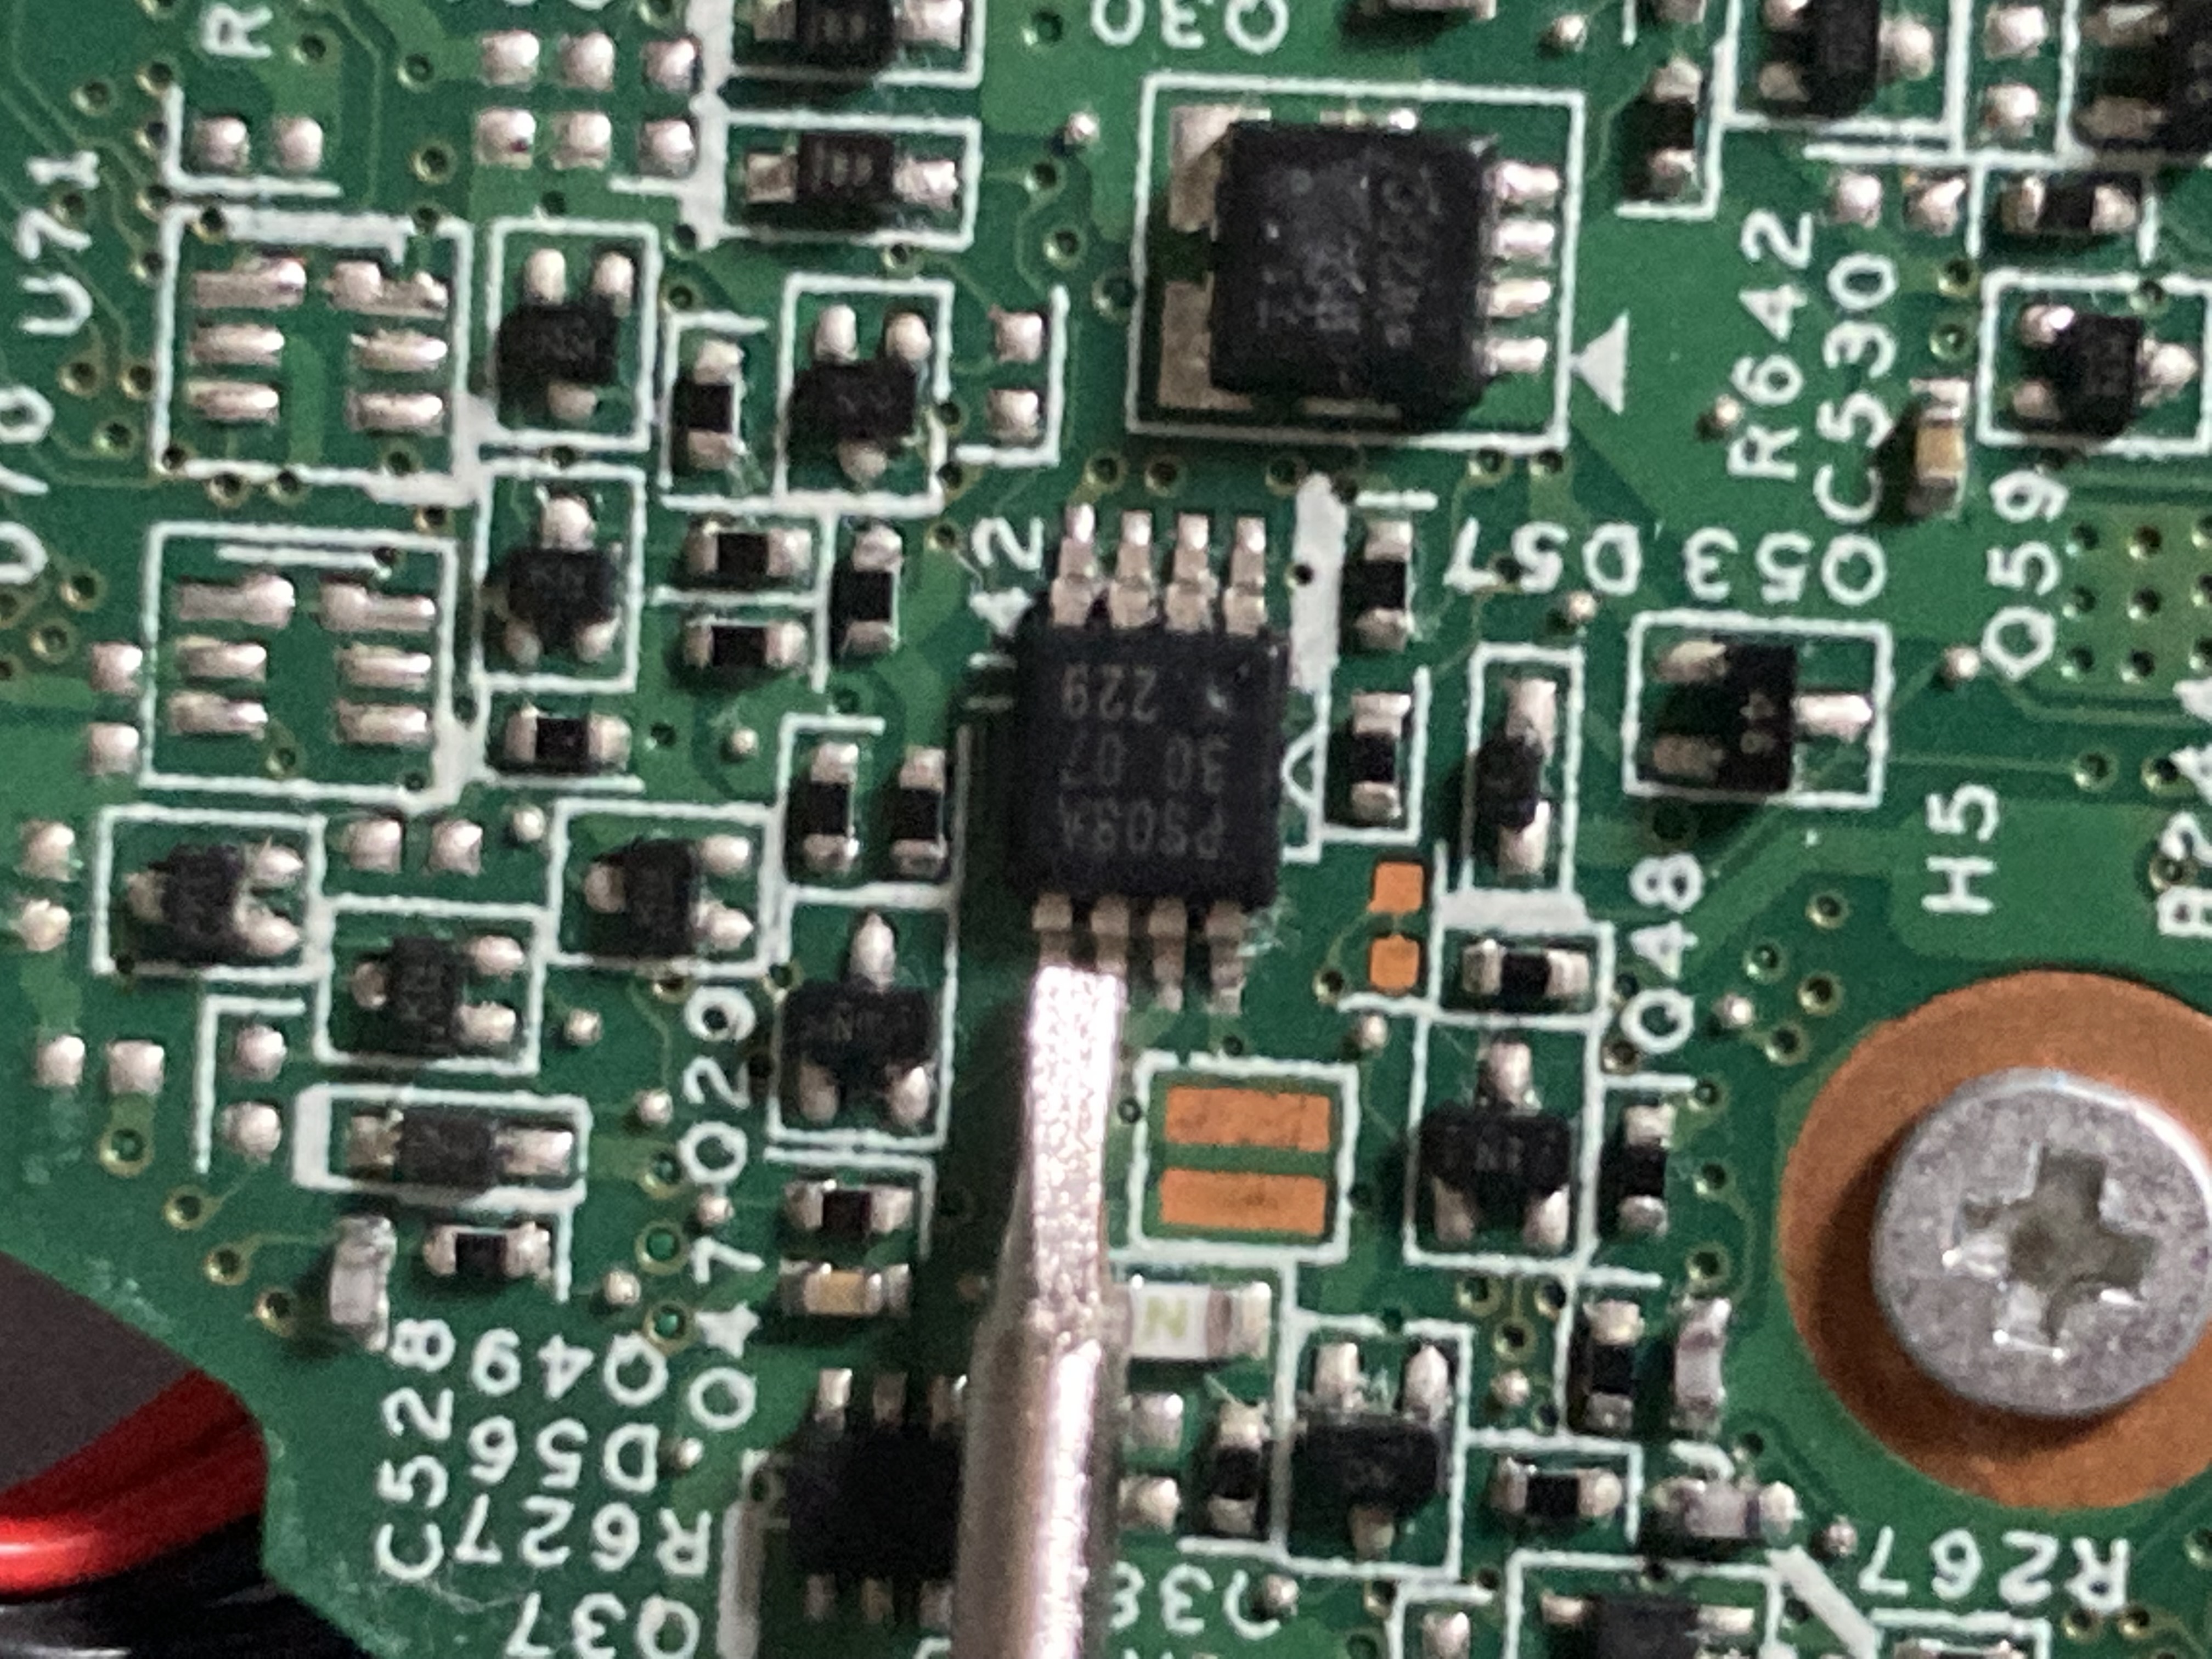 A small flat head screw driver
shorting the data and clock pins of the security EEPROM